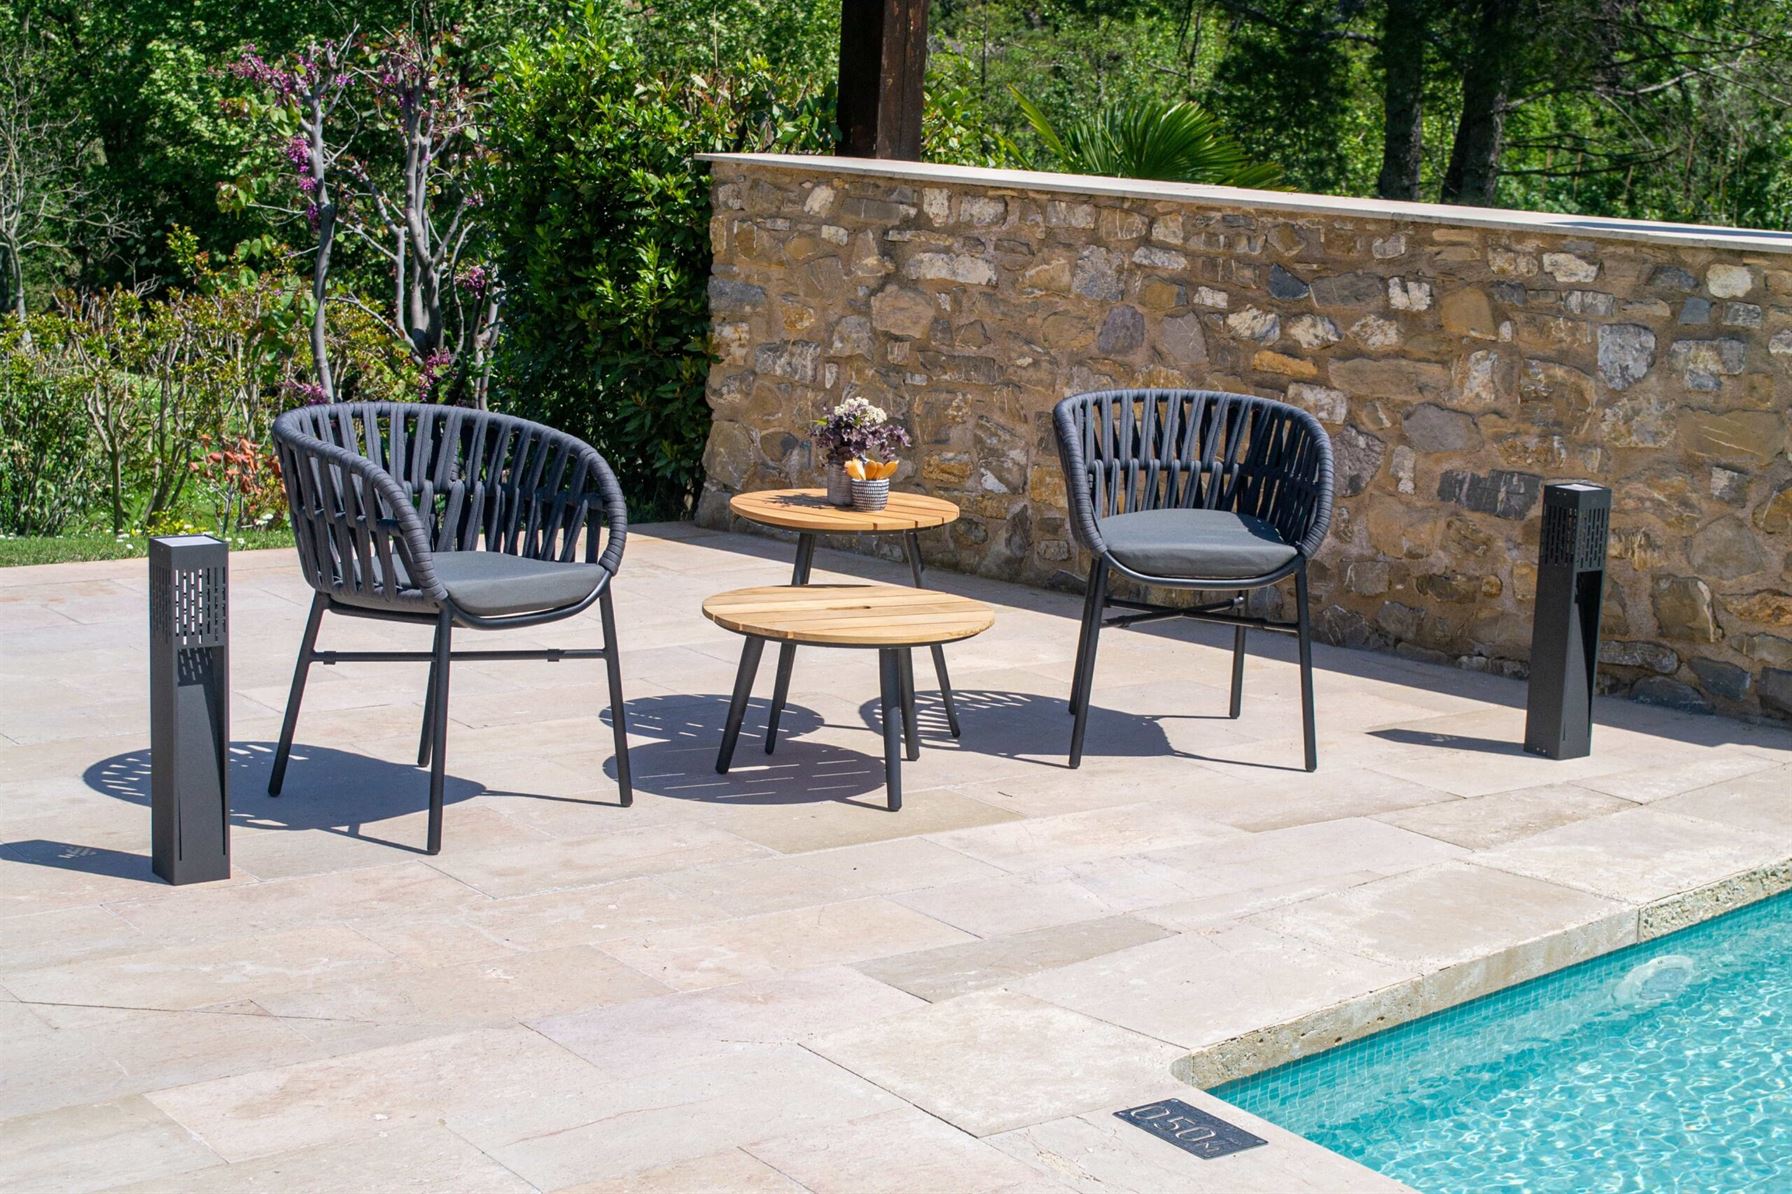 Why Commercial-Grade Outdoor Furniture Outperforms Residential Alternatives